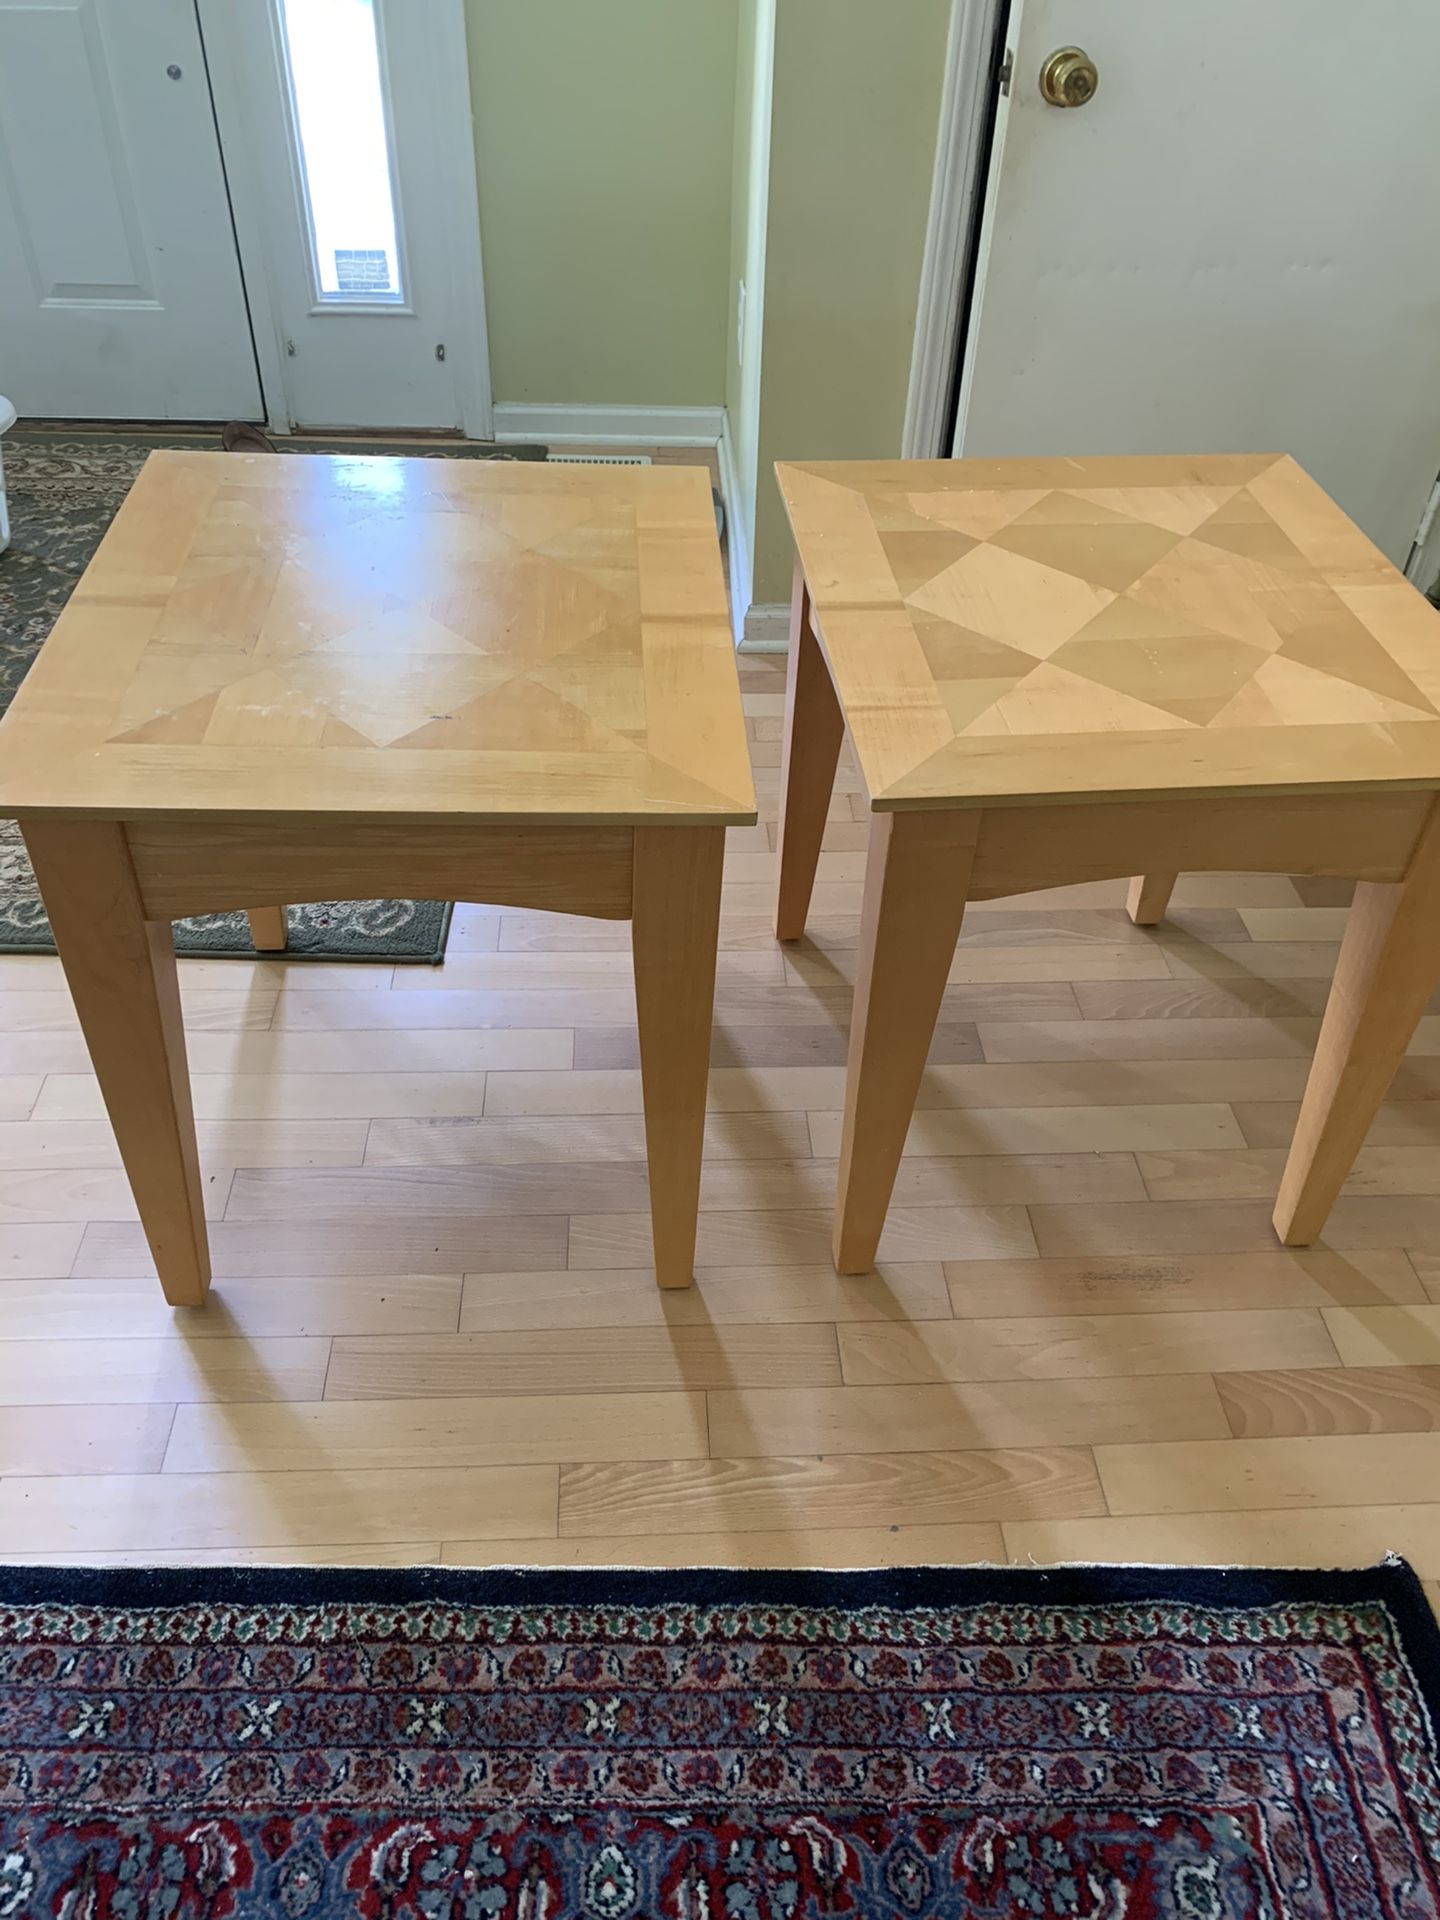 Two nice coffee table or end tables for sale